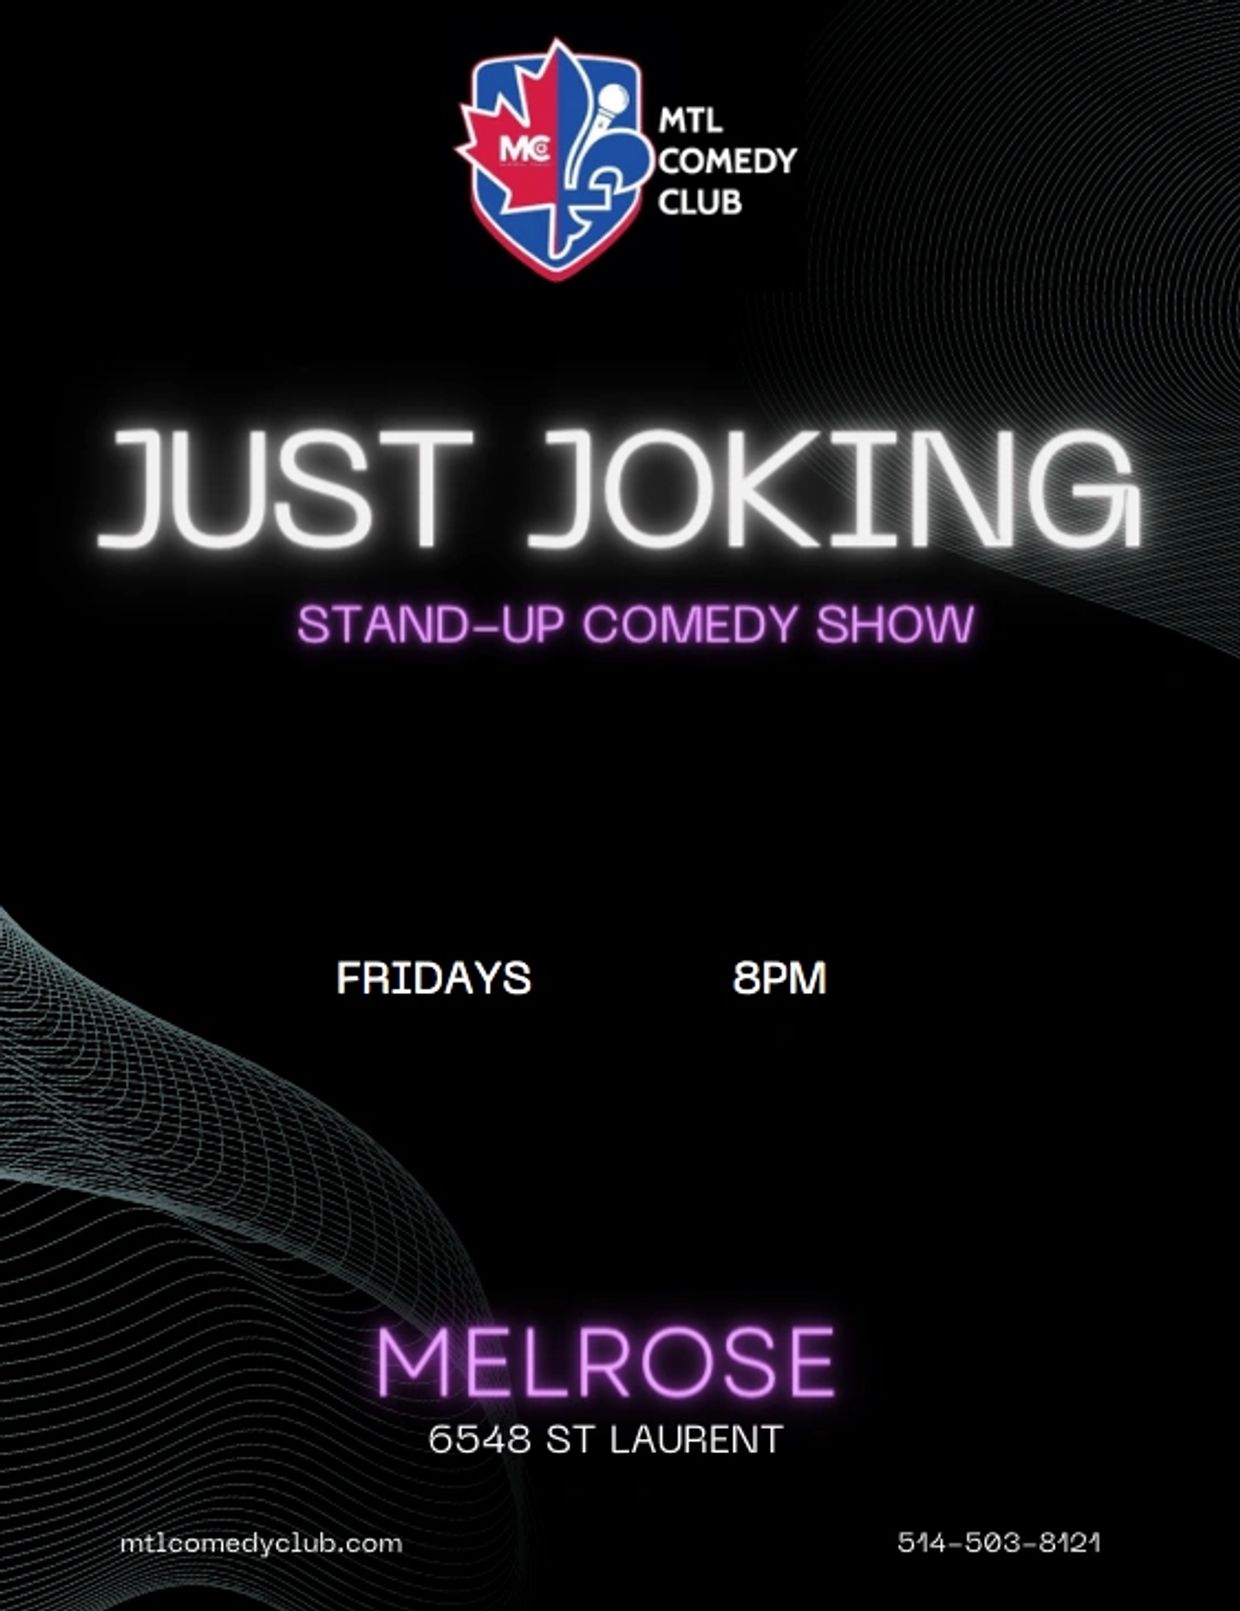 Melrose Comedy Extravaganza: Laugh the Night Away in Montreal! 
MONTREALJOKES.COM